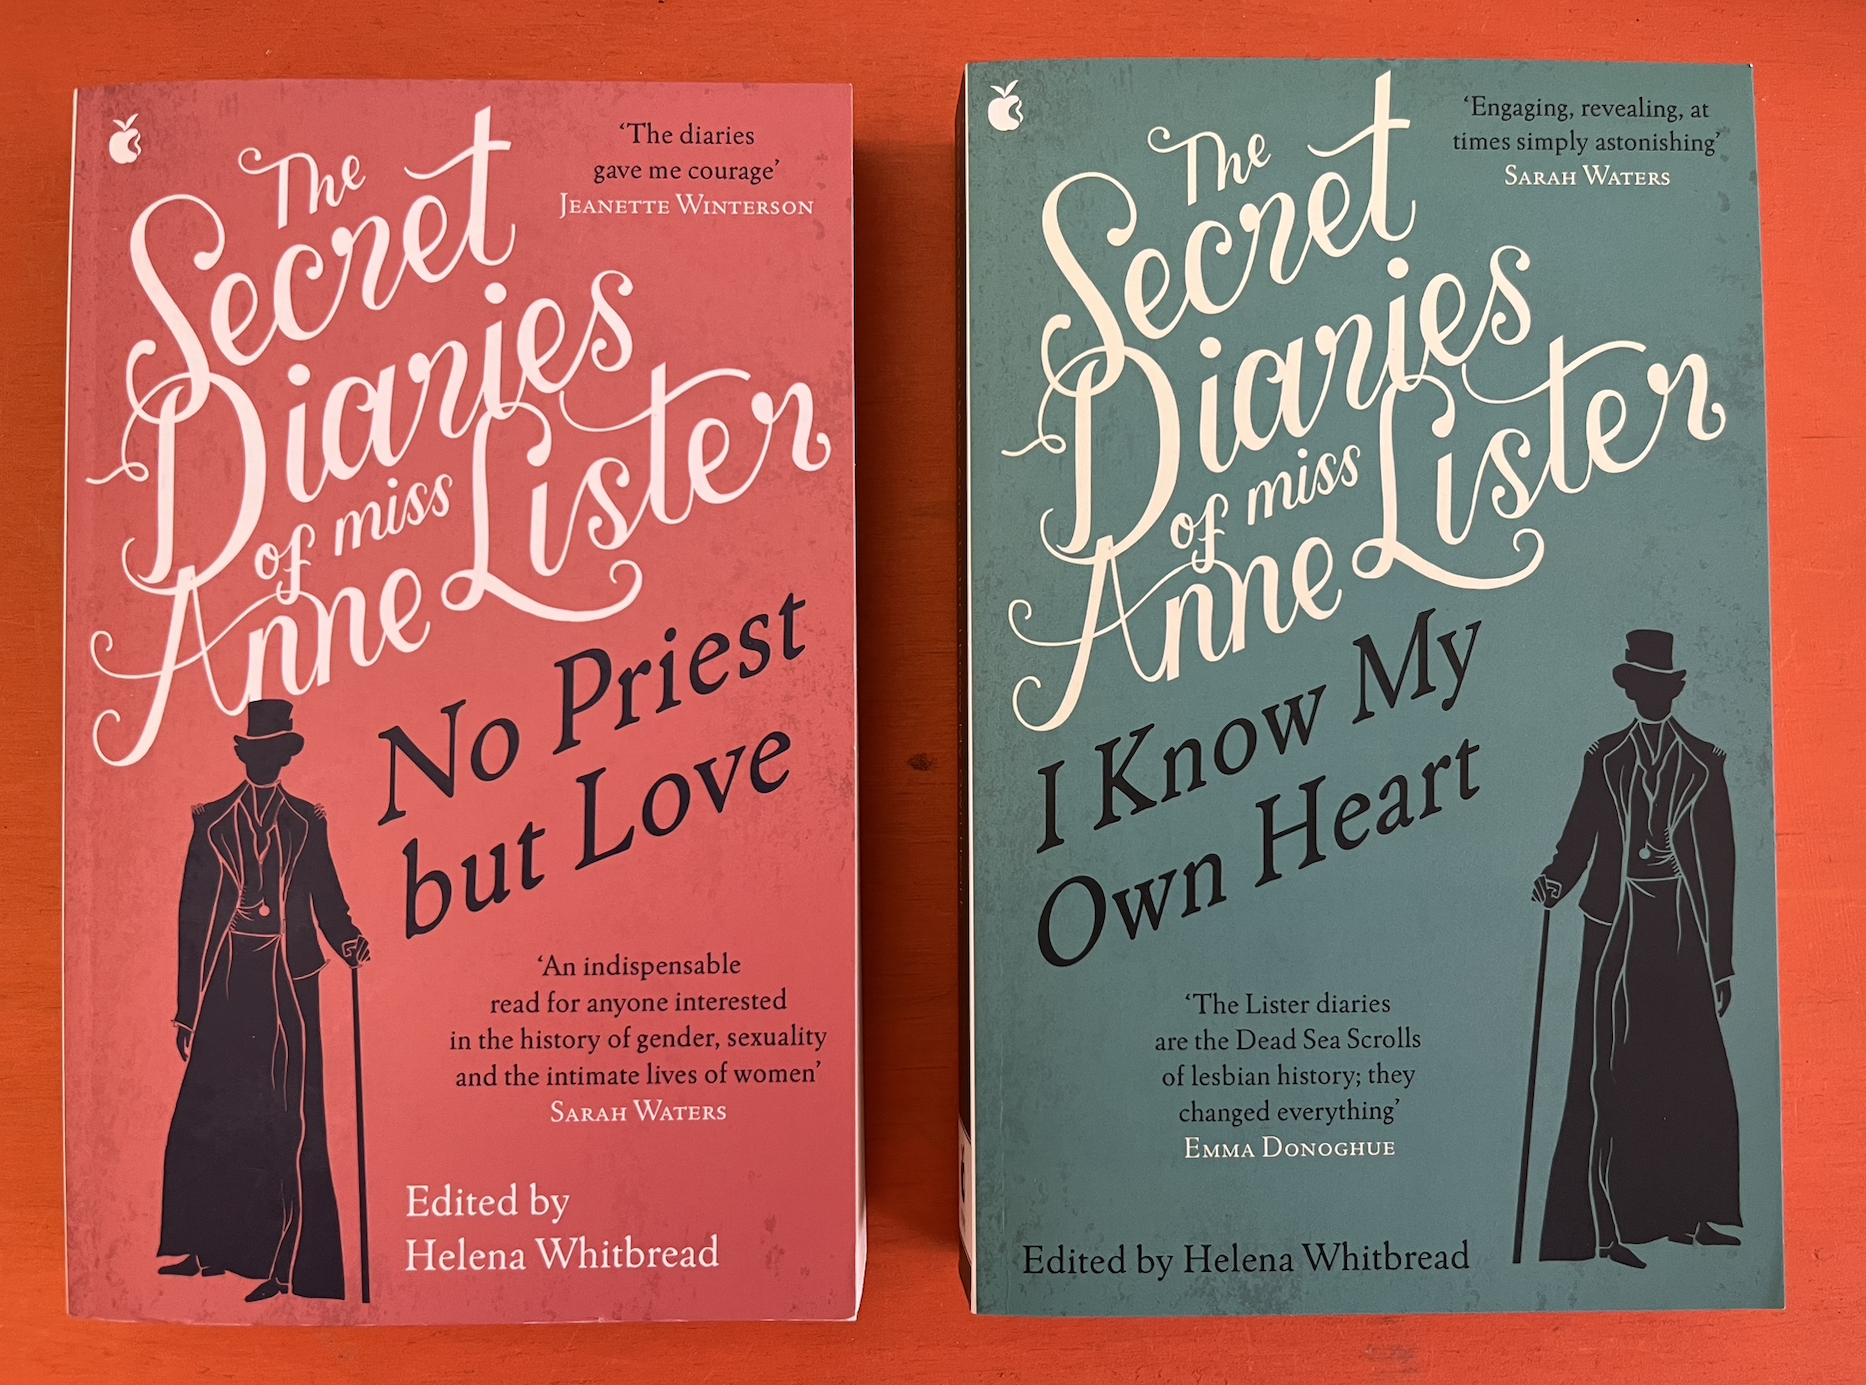 The Secret Diaries Of Miss Anne Lister – Vol. 1: I Know My Own Heart / The Secret Diaries of Miss Anne Lister – Vol.2: The Secret Diaries of Miss Anne Lister, the Inspiration for Gentleman Jack